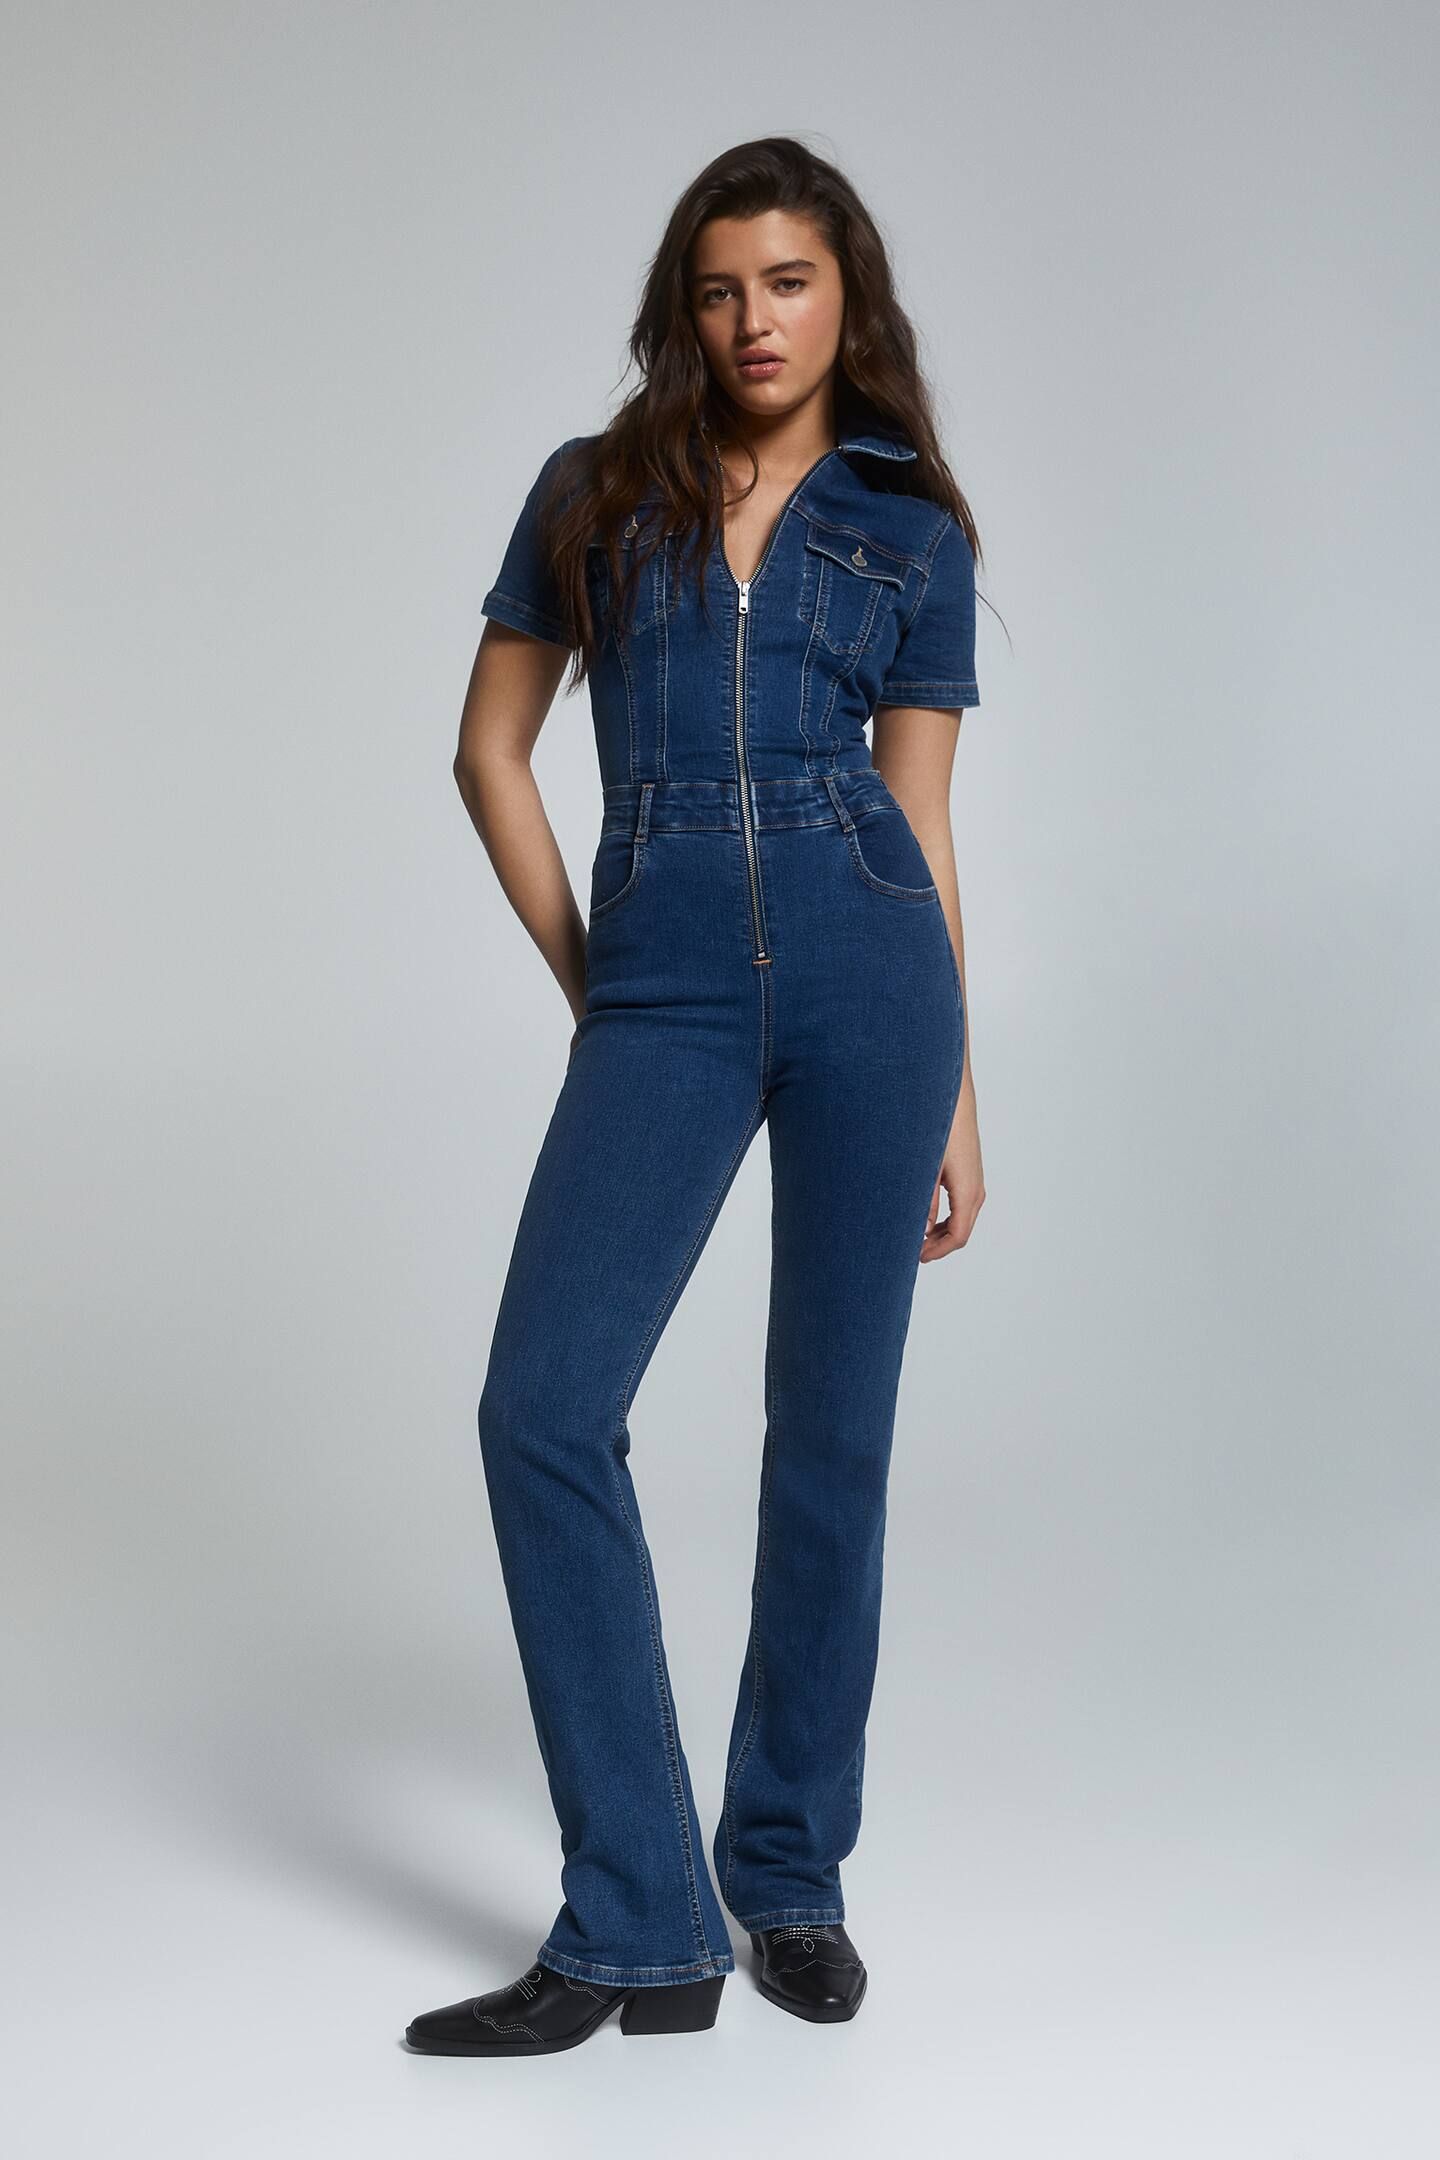 Denim jumpsuit with short sleeves | PULL and BEAR UK